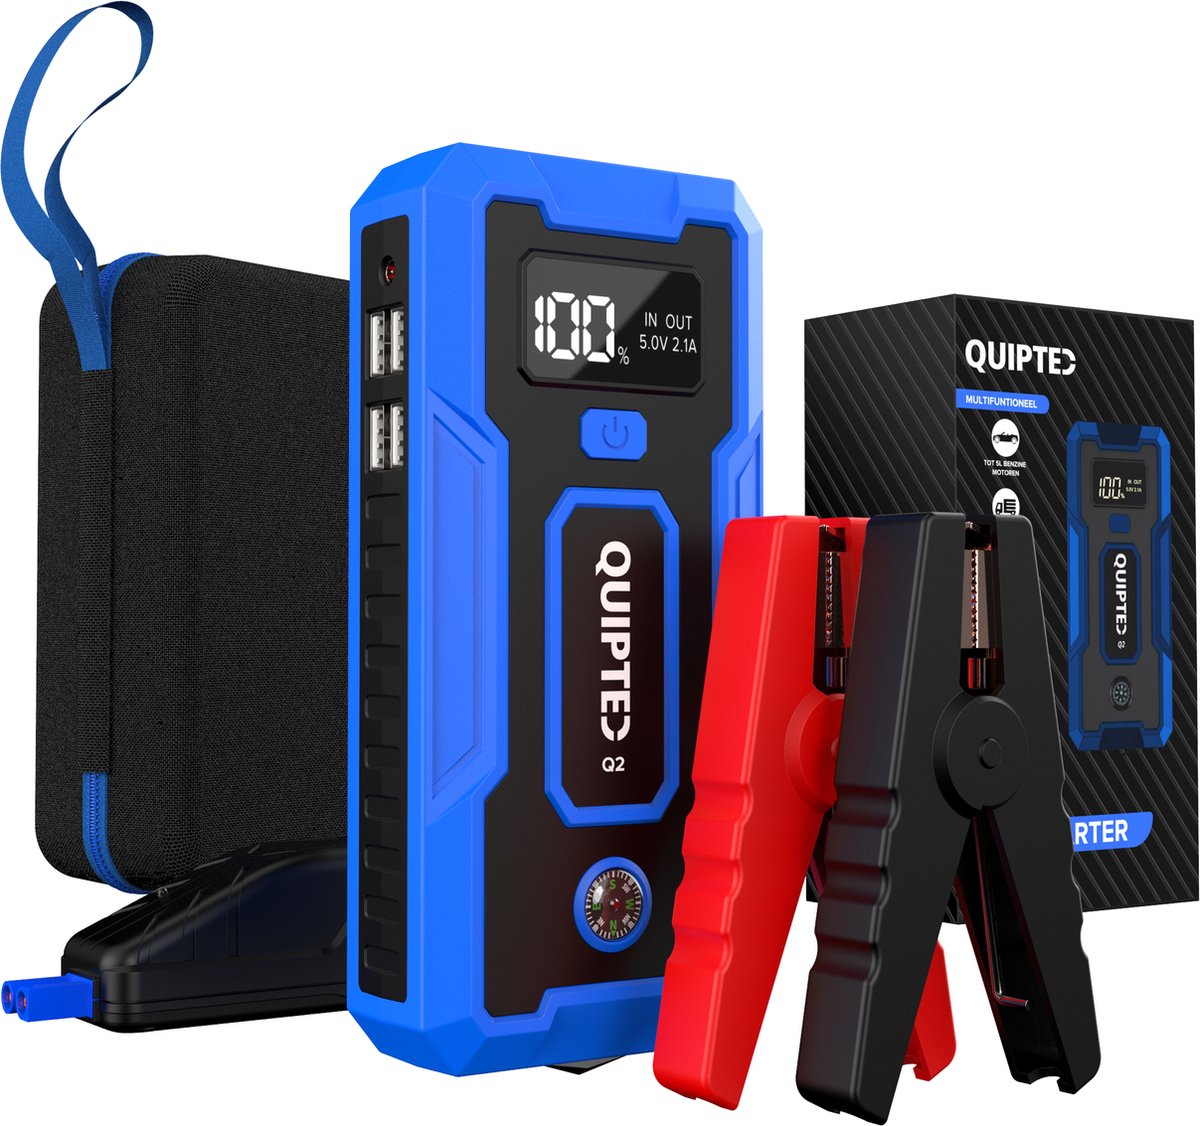 Quipted 7-in-1 Jumpstarter voor auto - 12V Starthulp - 1000A - Startbooster - Incl Opbergcase - Quipted